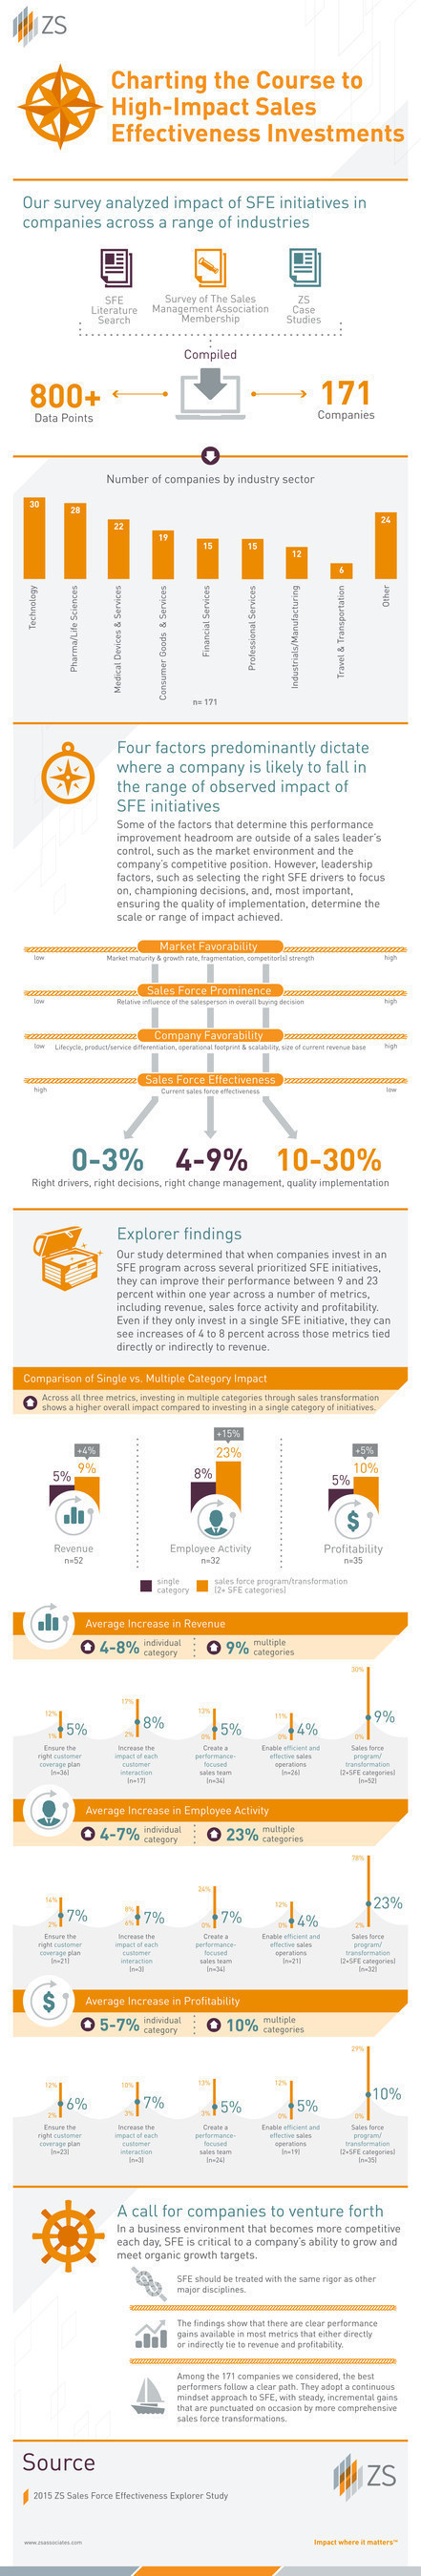 New Explorer Study by ZS measures the impact of sales force effectiveness initiatives on company performance and growth